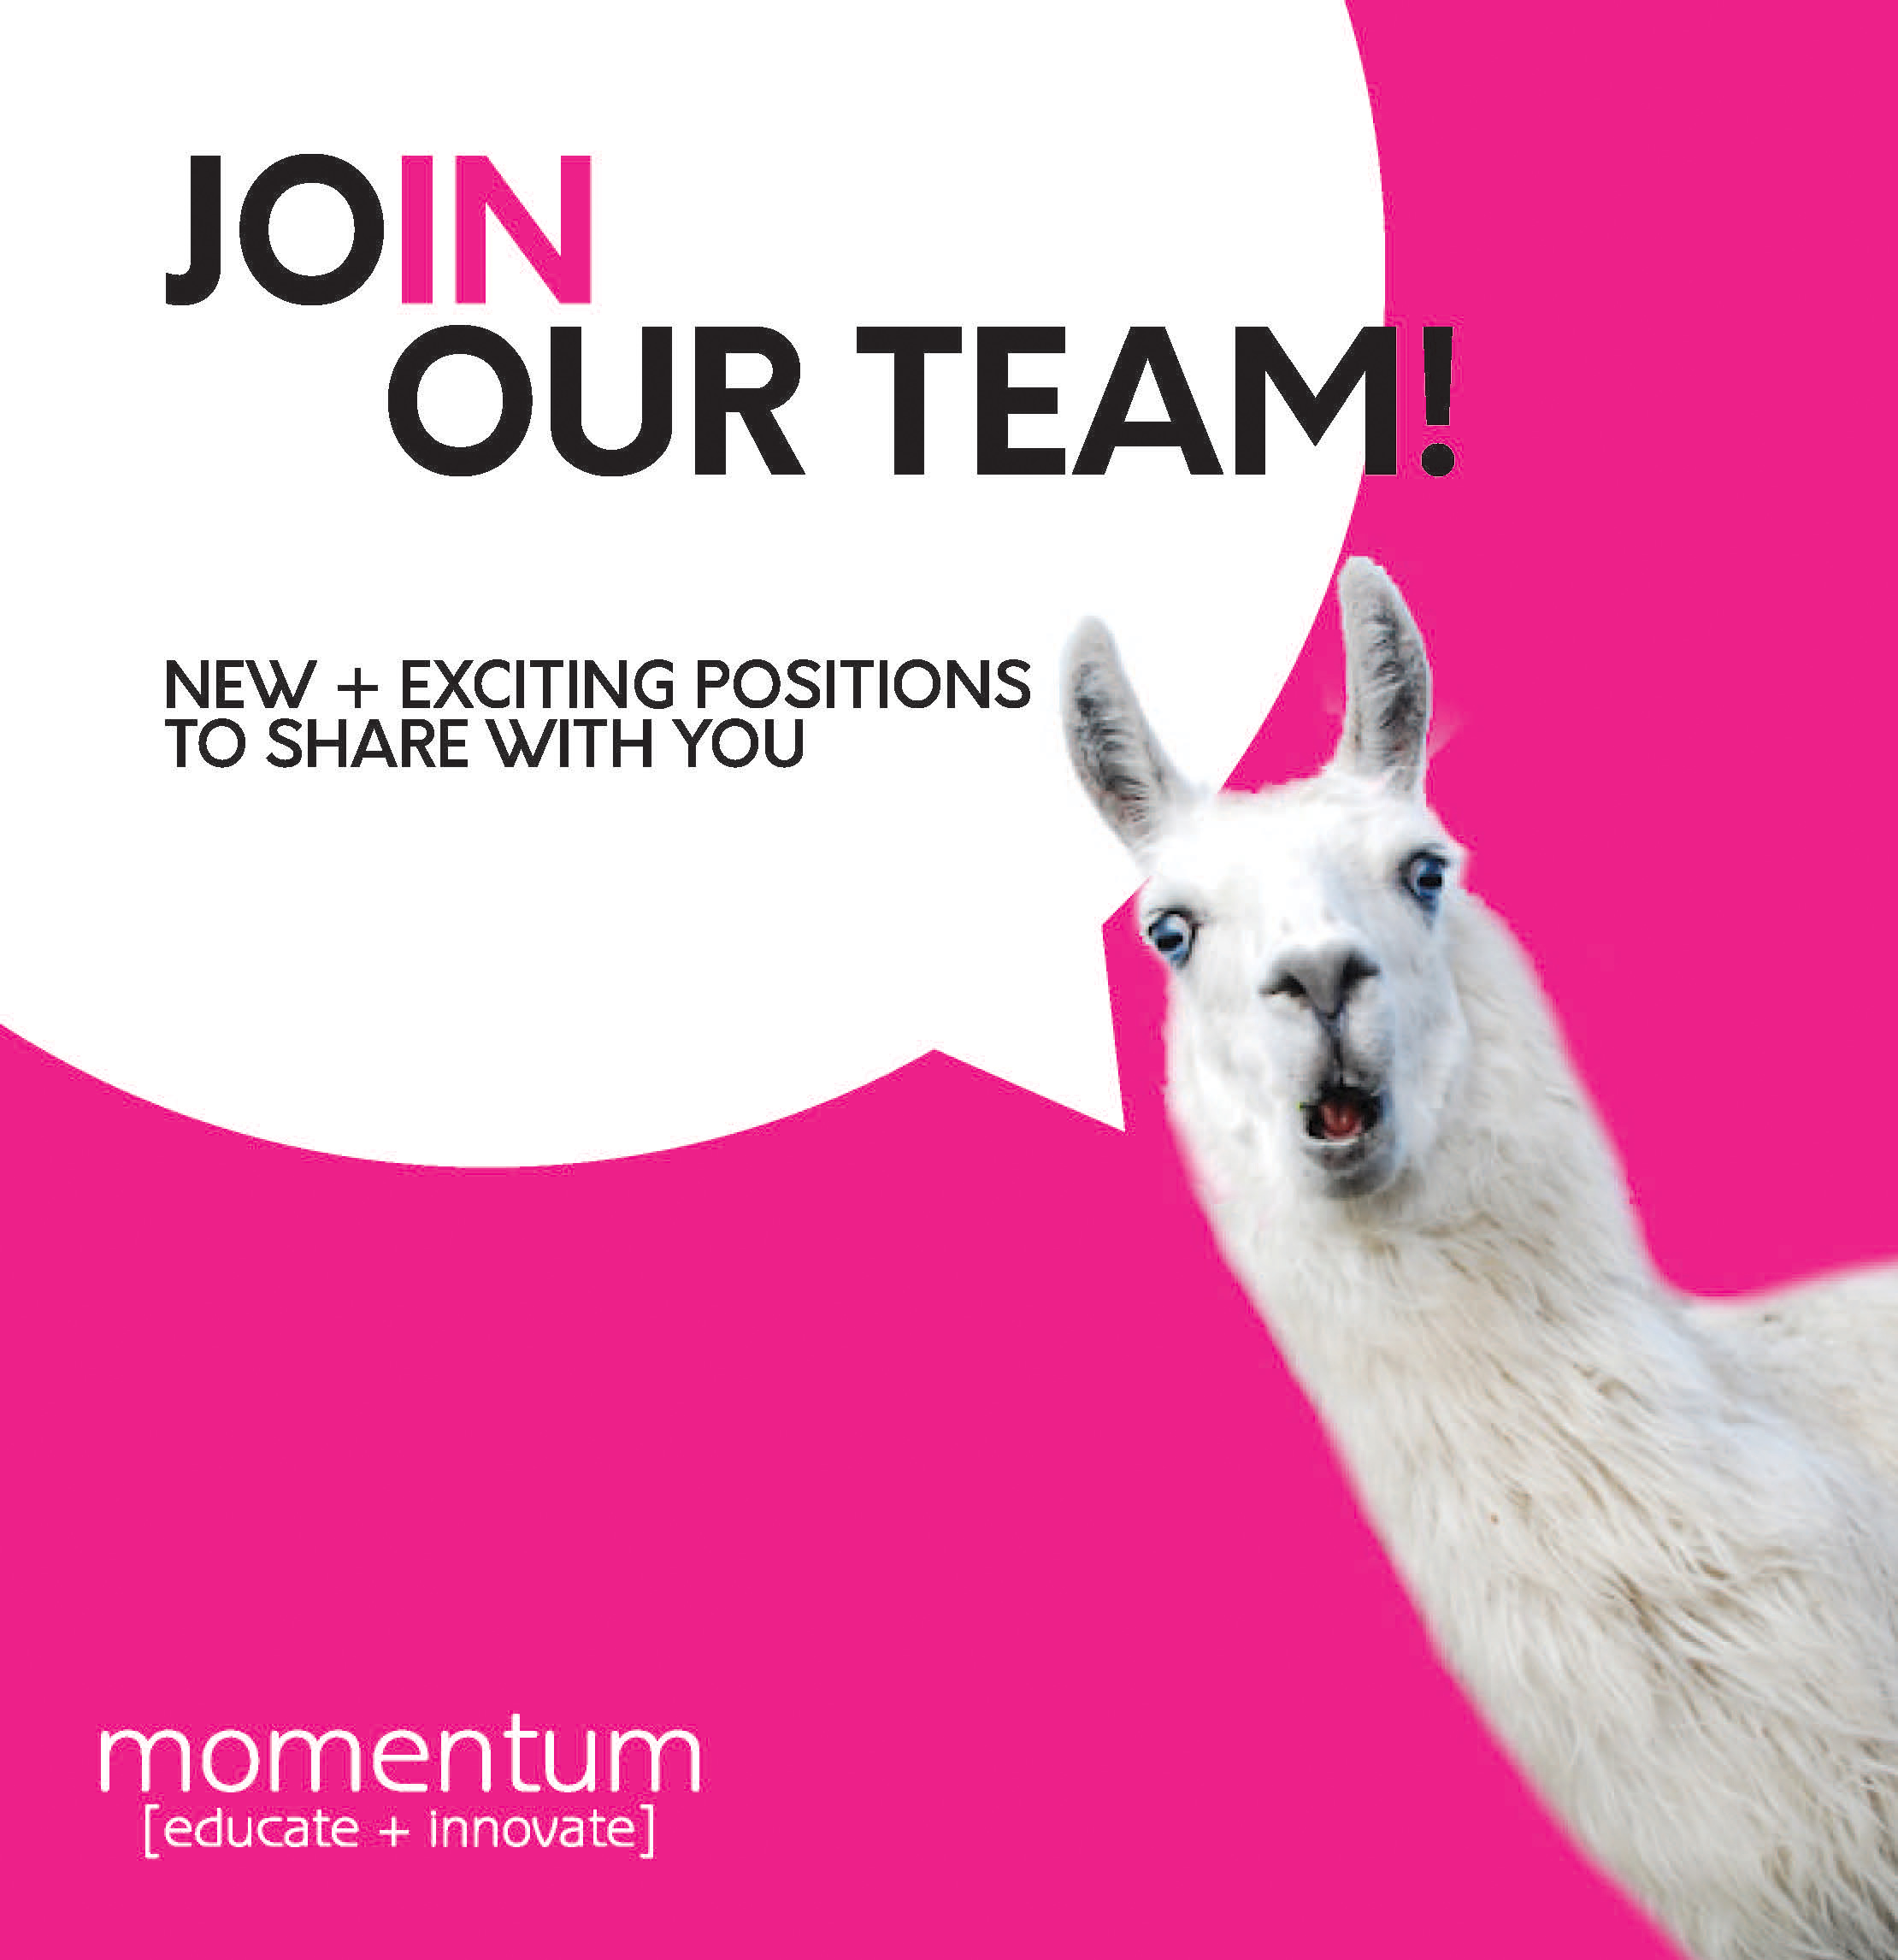 Momentum - Join Our Team (JOB ADVERT) v3_Page_1